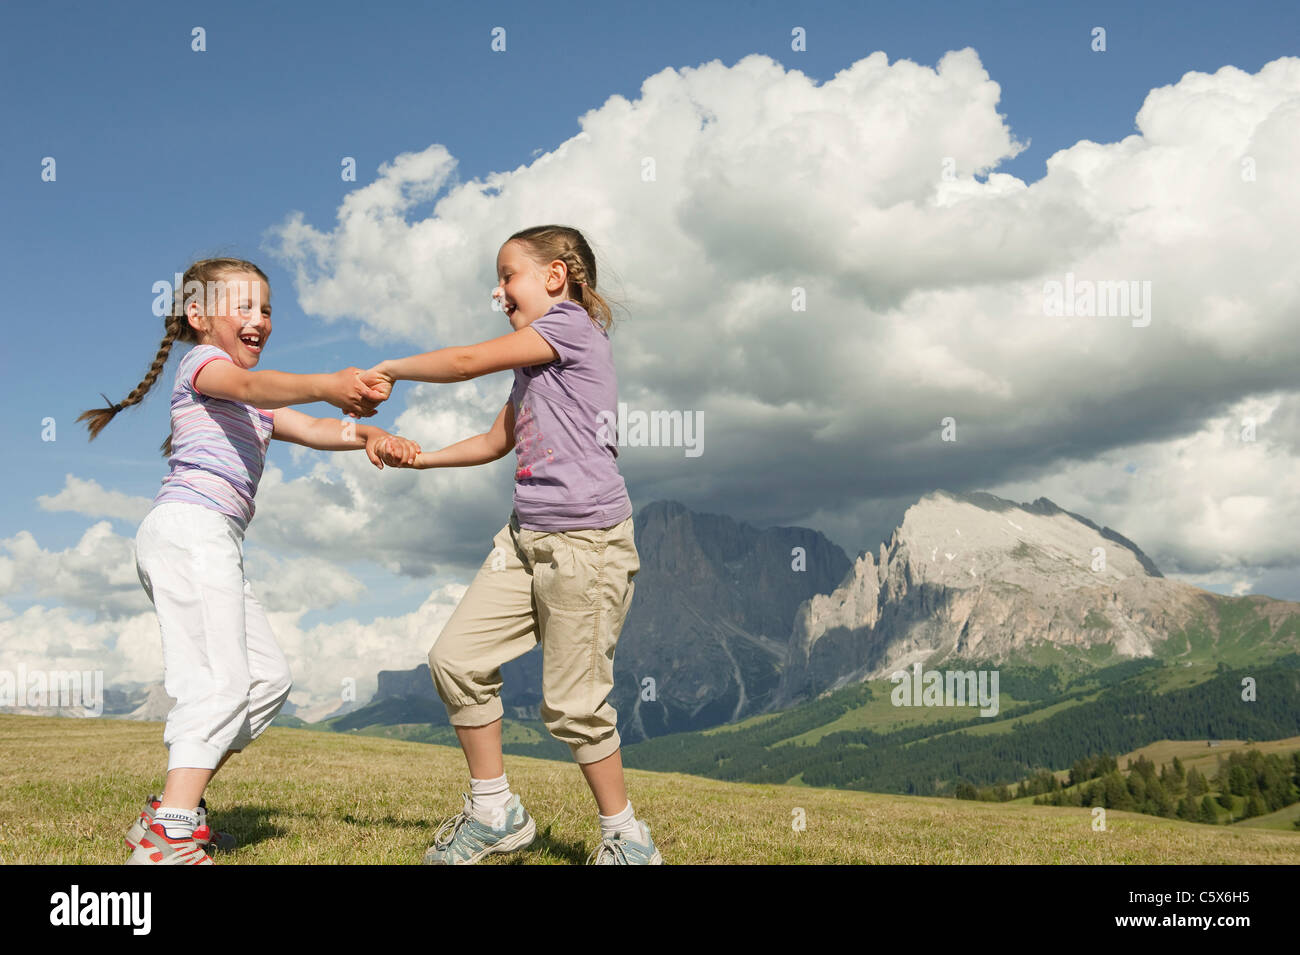 Italy, Seiseralm, Girls (6-7), (8-9) dancing in meadow Stock Photo